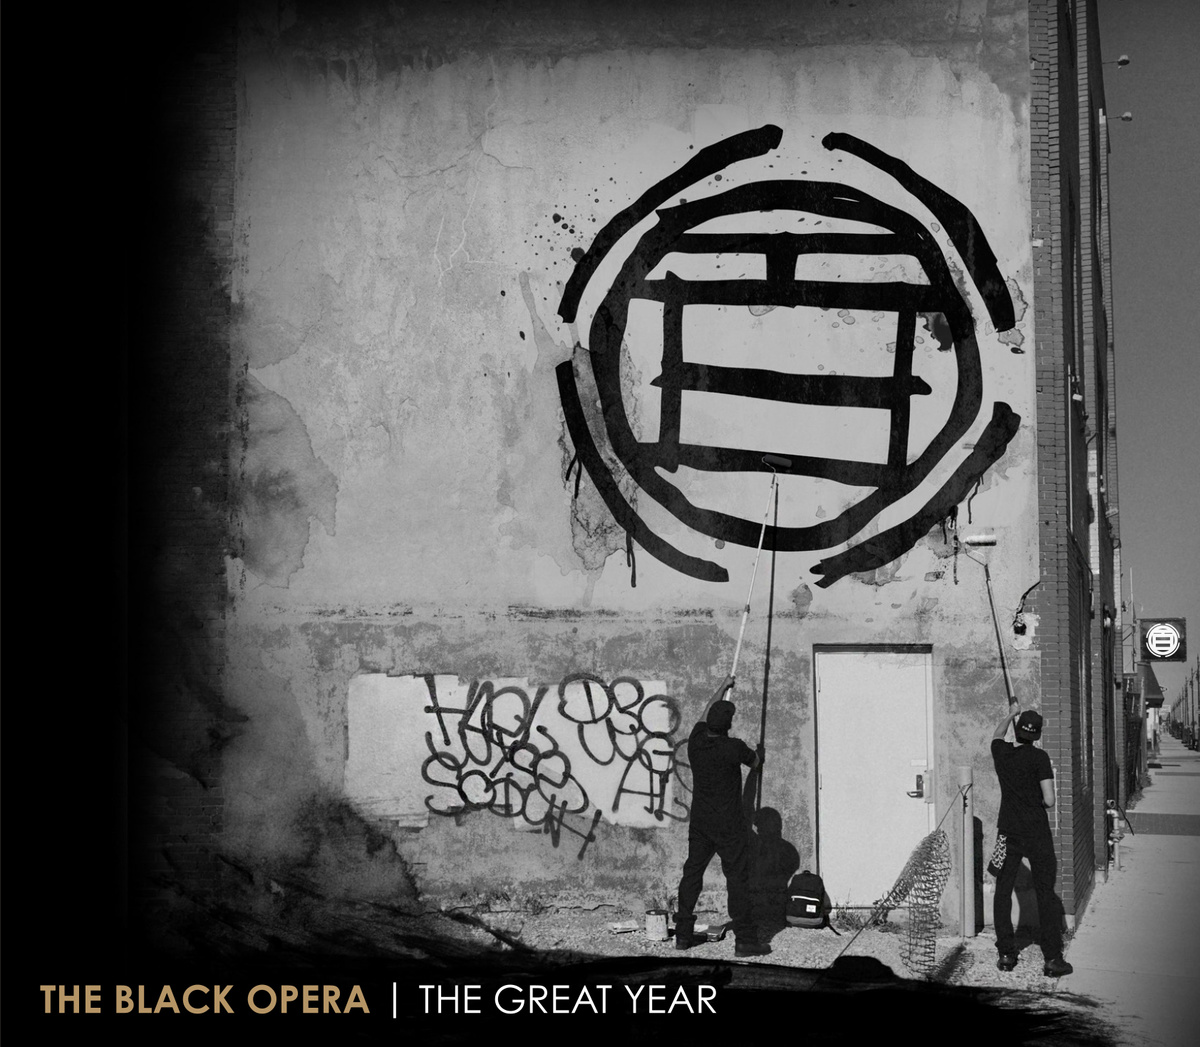 The Black Opera - "The Great Year" (Release)